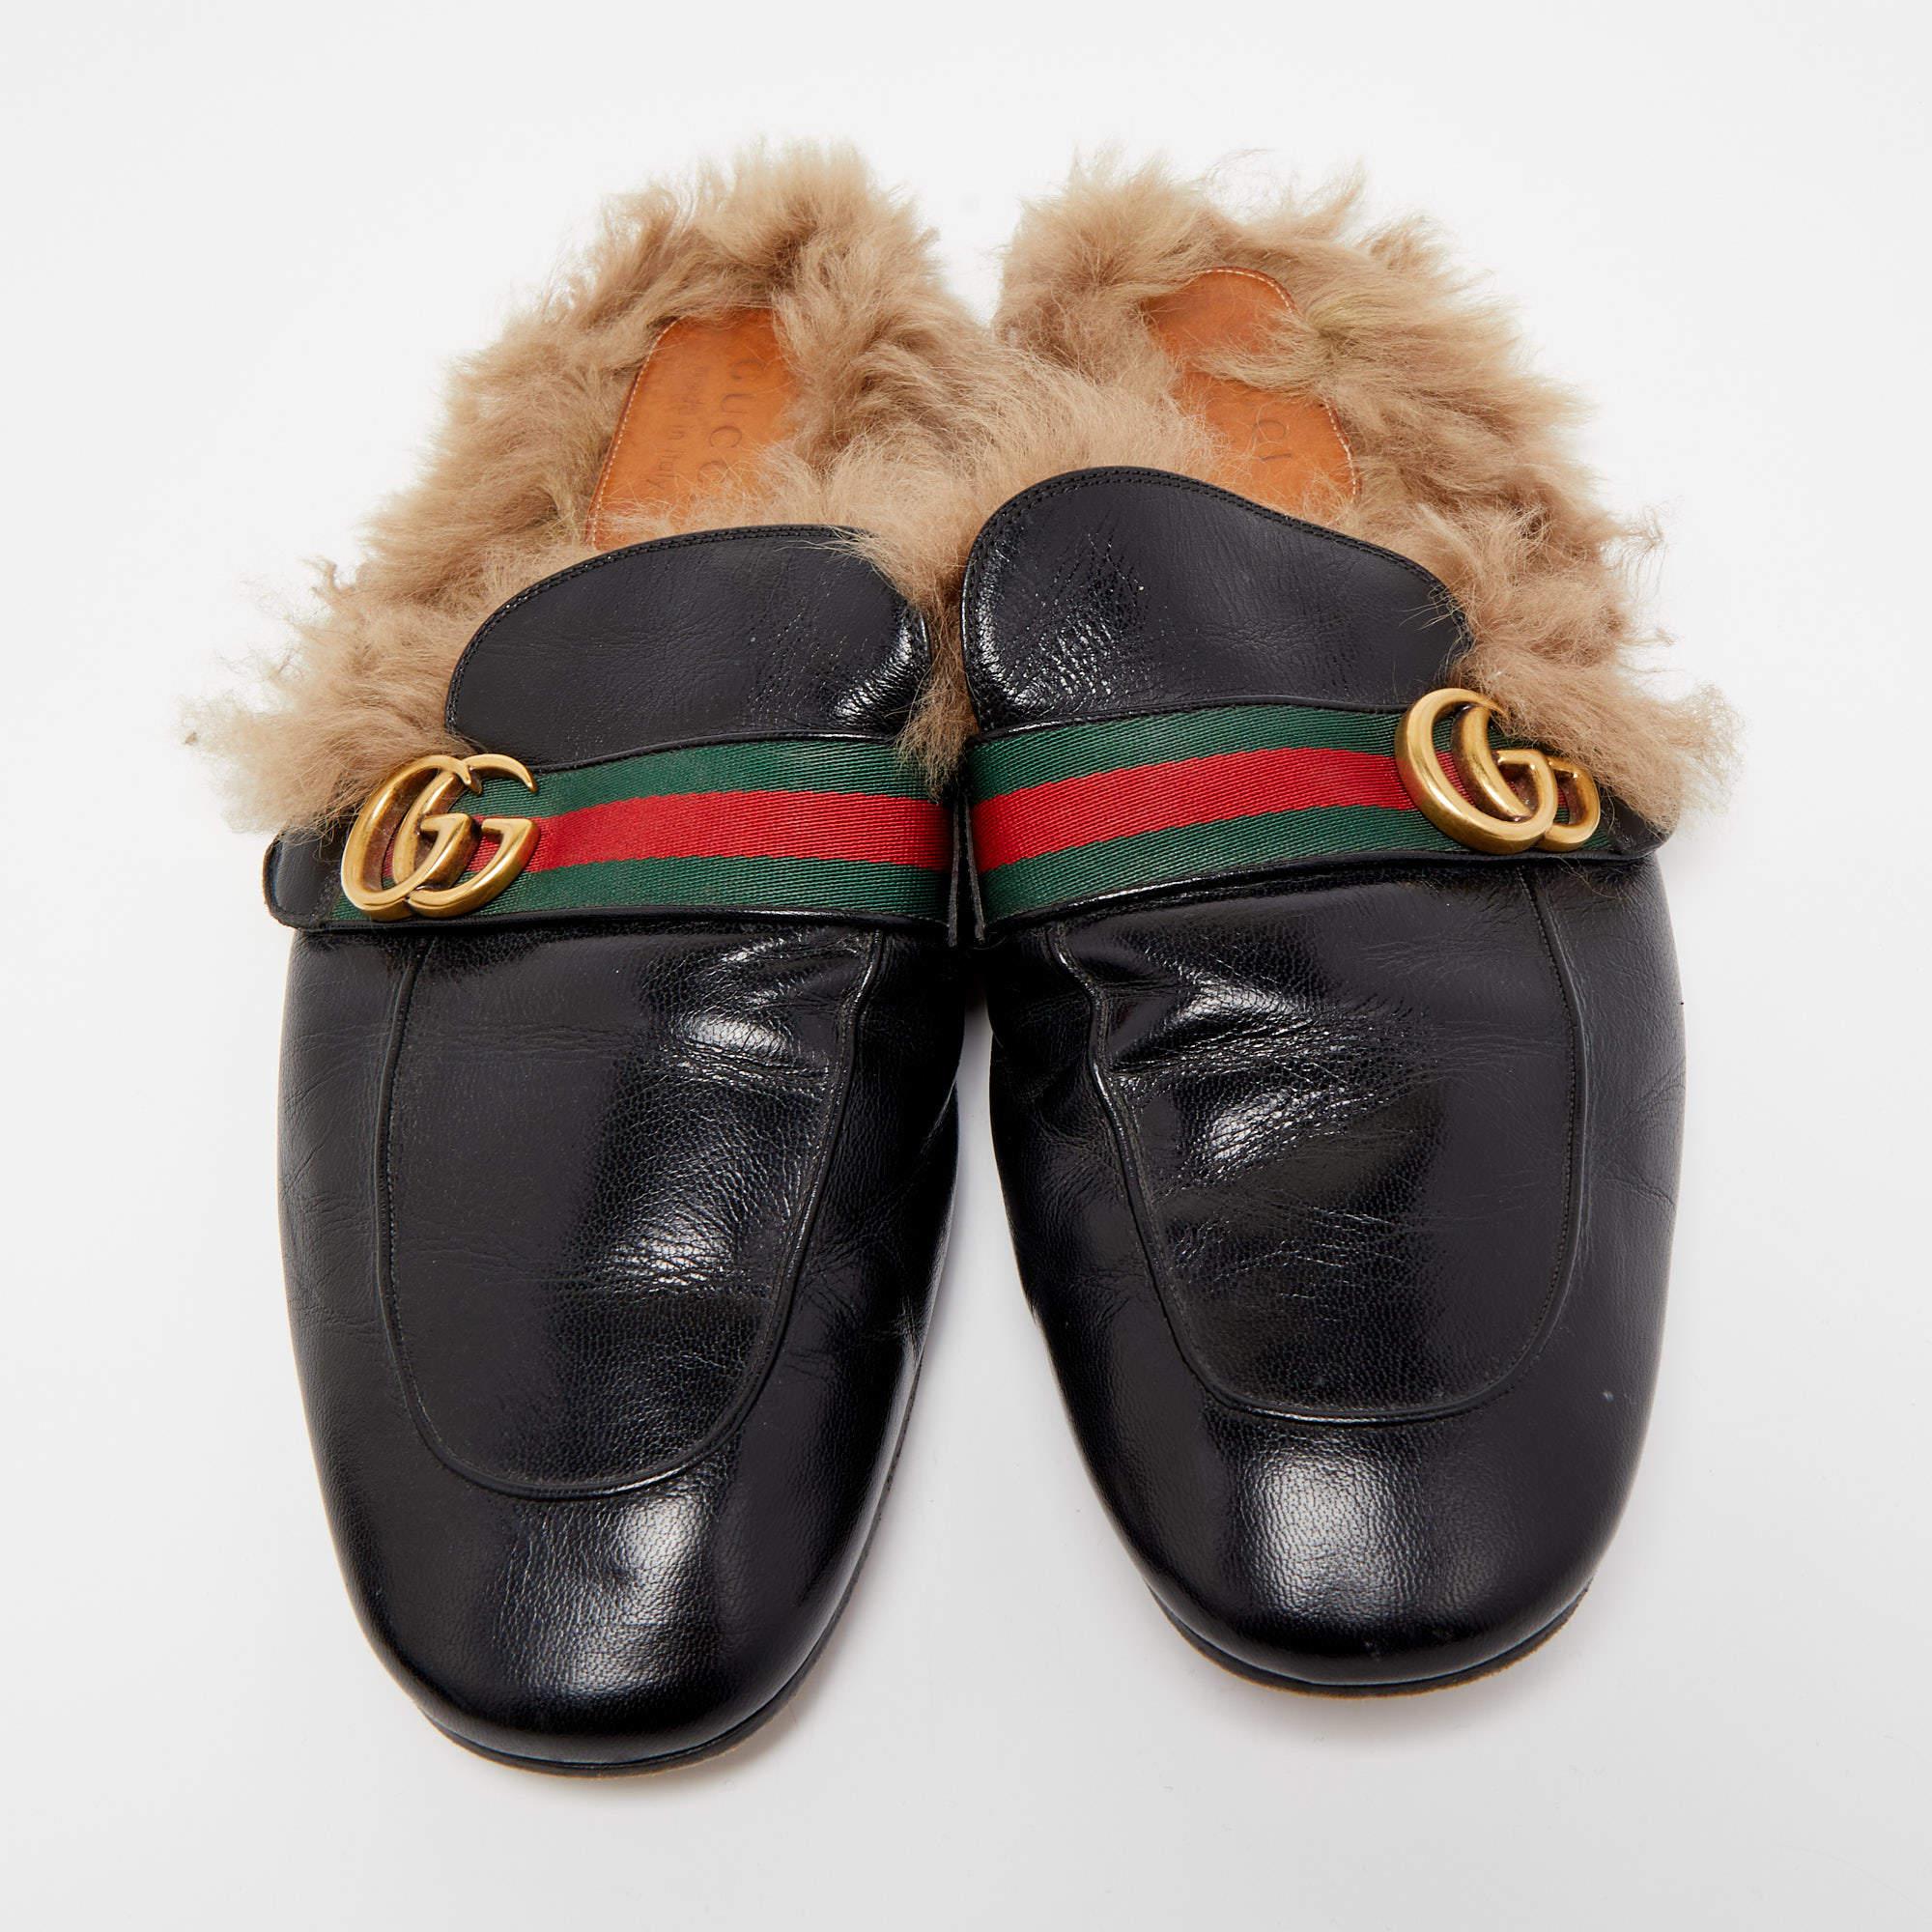 The ease of slipping into your shoes as you head out and taking them off once you're home is elevated with mules. These Gucci mules for men bring the same comfort, with a lot of style.

